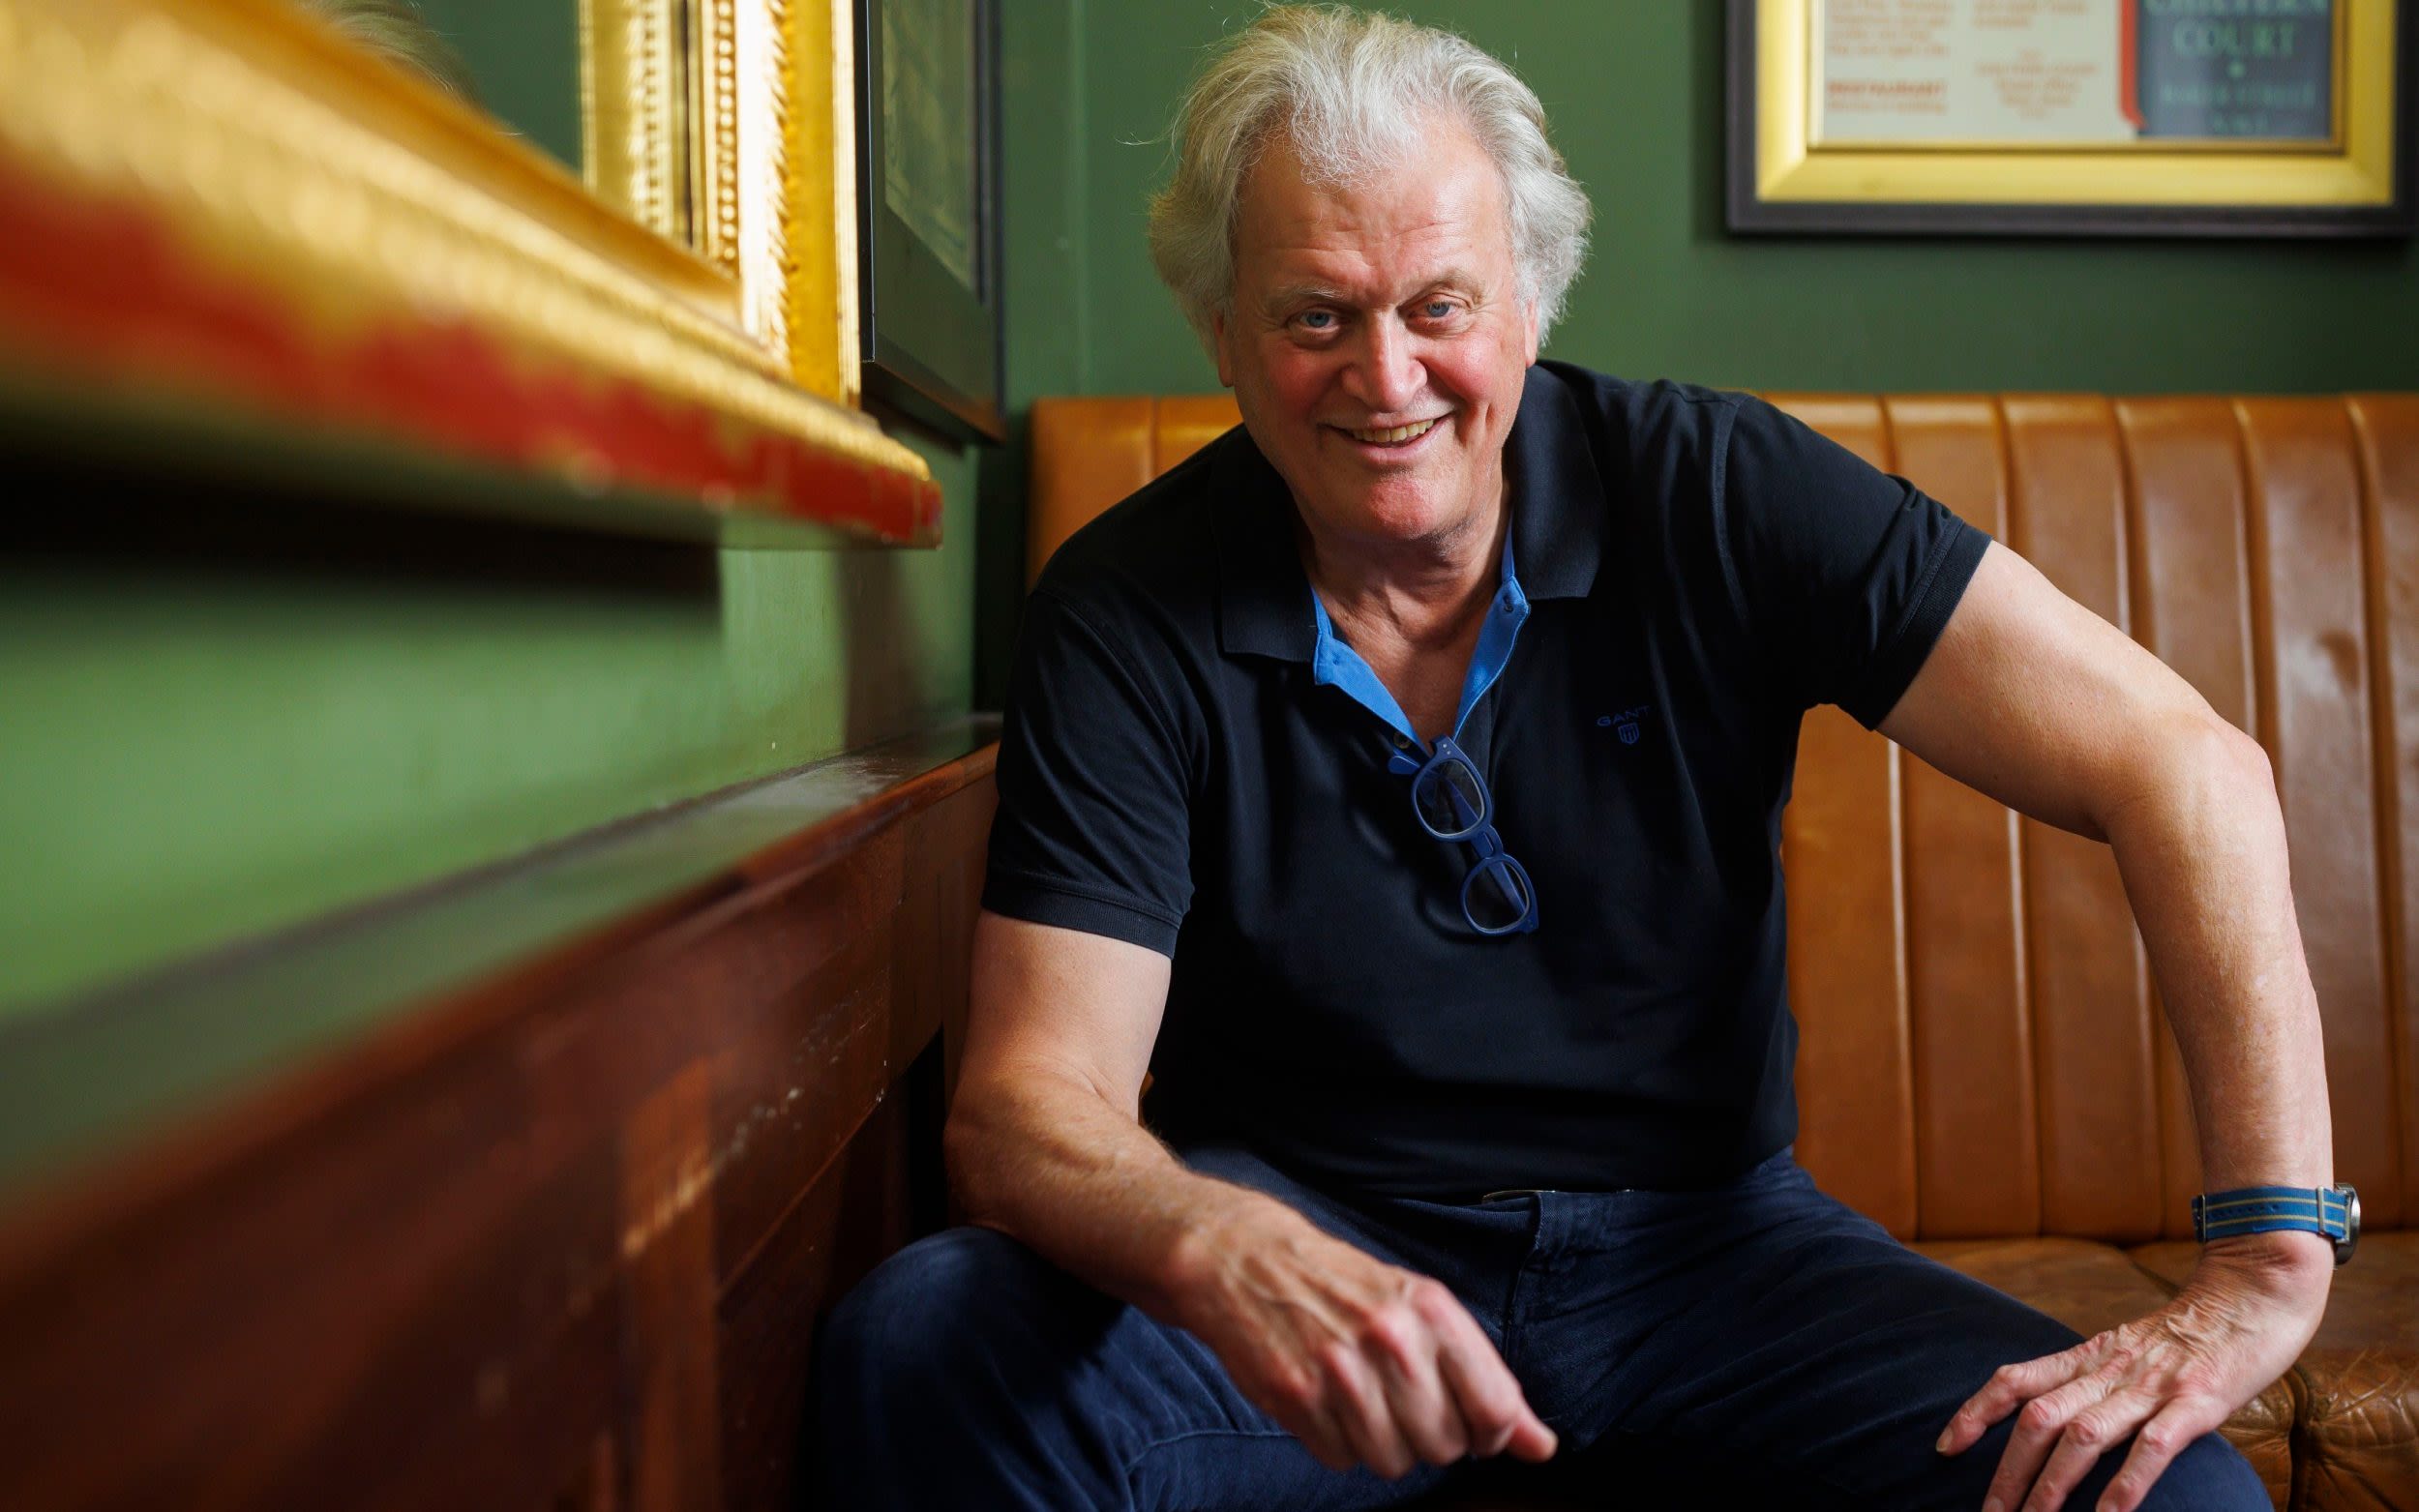 ‘Gods of fashion’ smiling on Guinness, says Wetherspoon founder